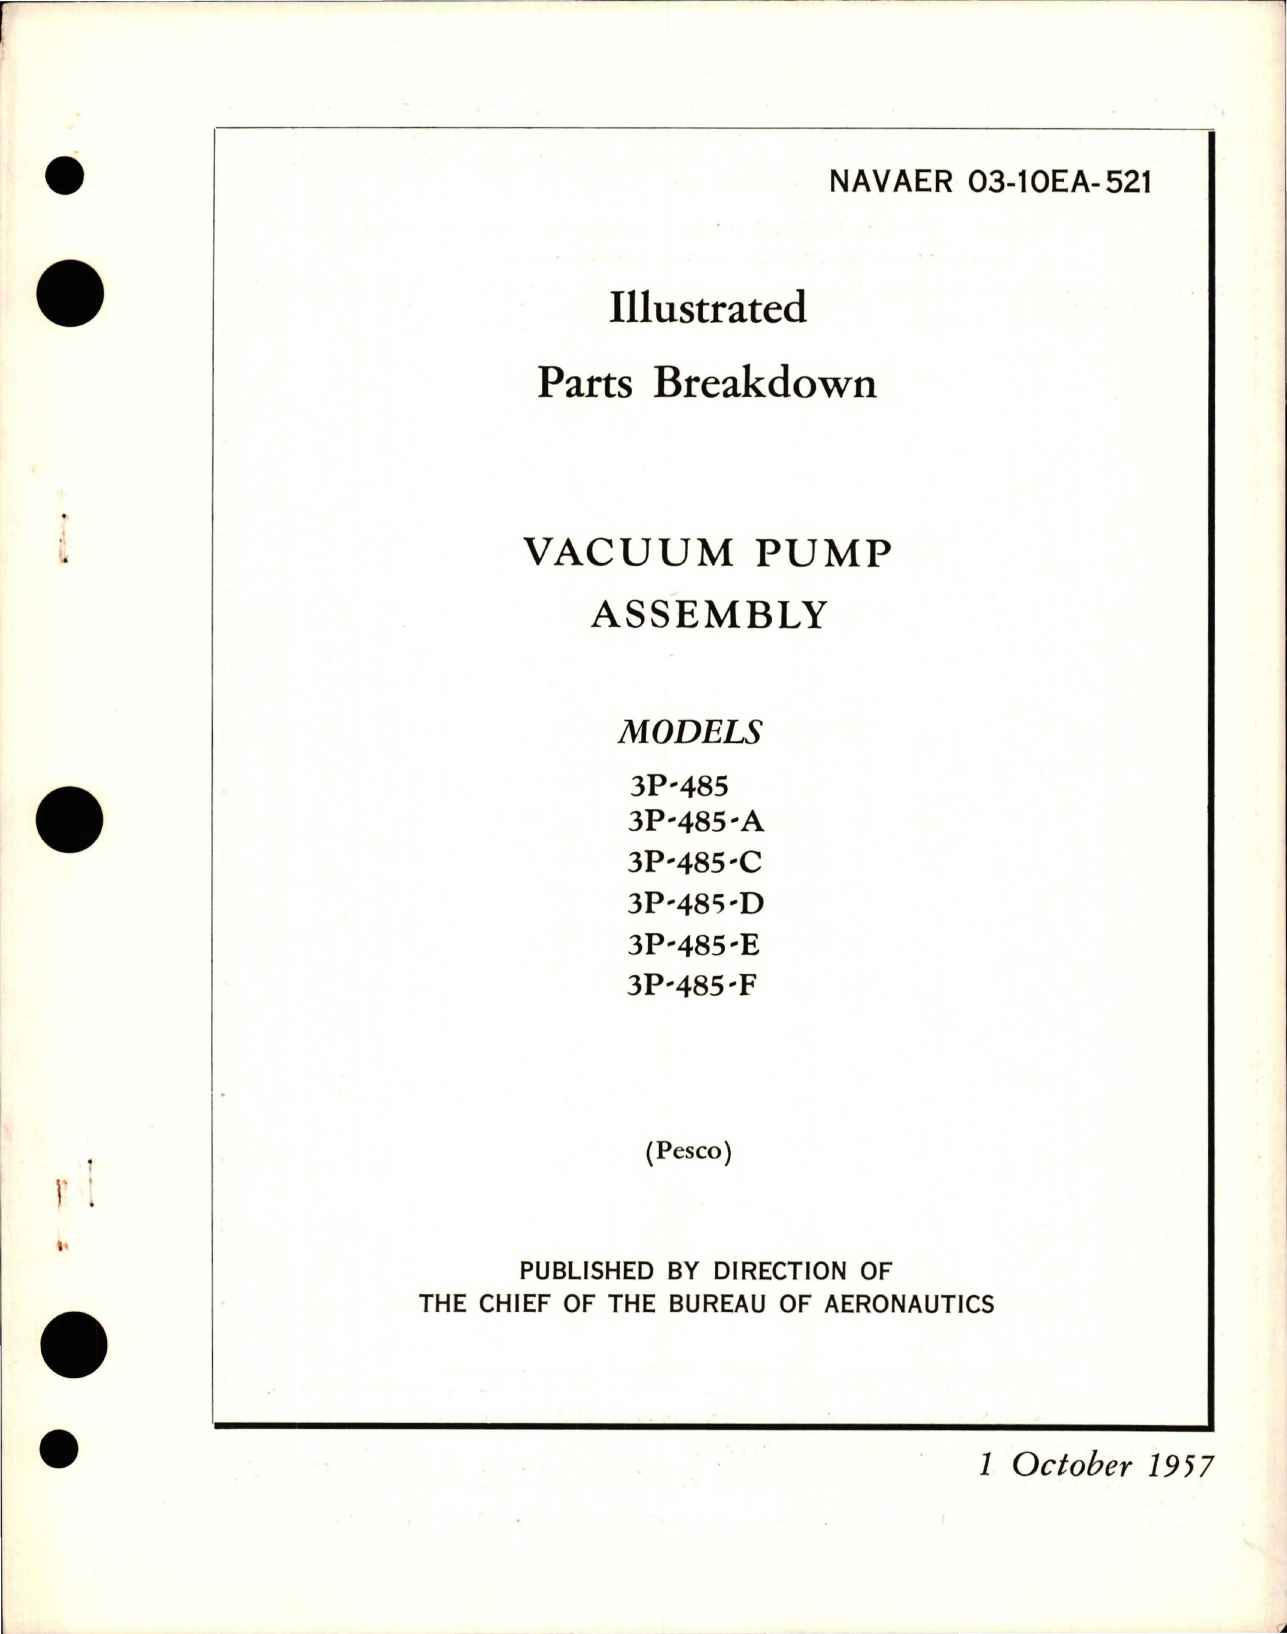 Sample page 1 from AirCorps Library document: Illustrated Parts Breakdown for Vacuum Pump Assembly